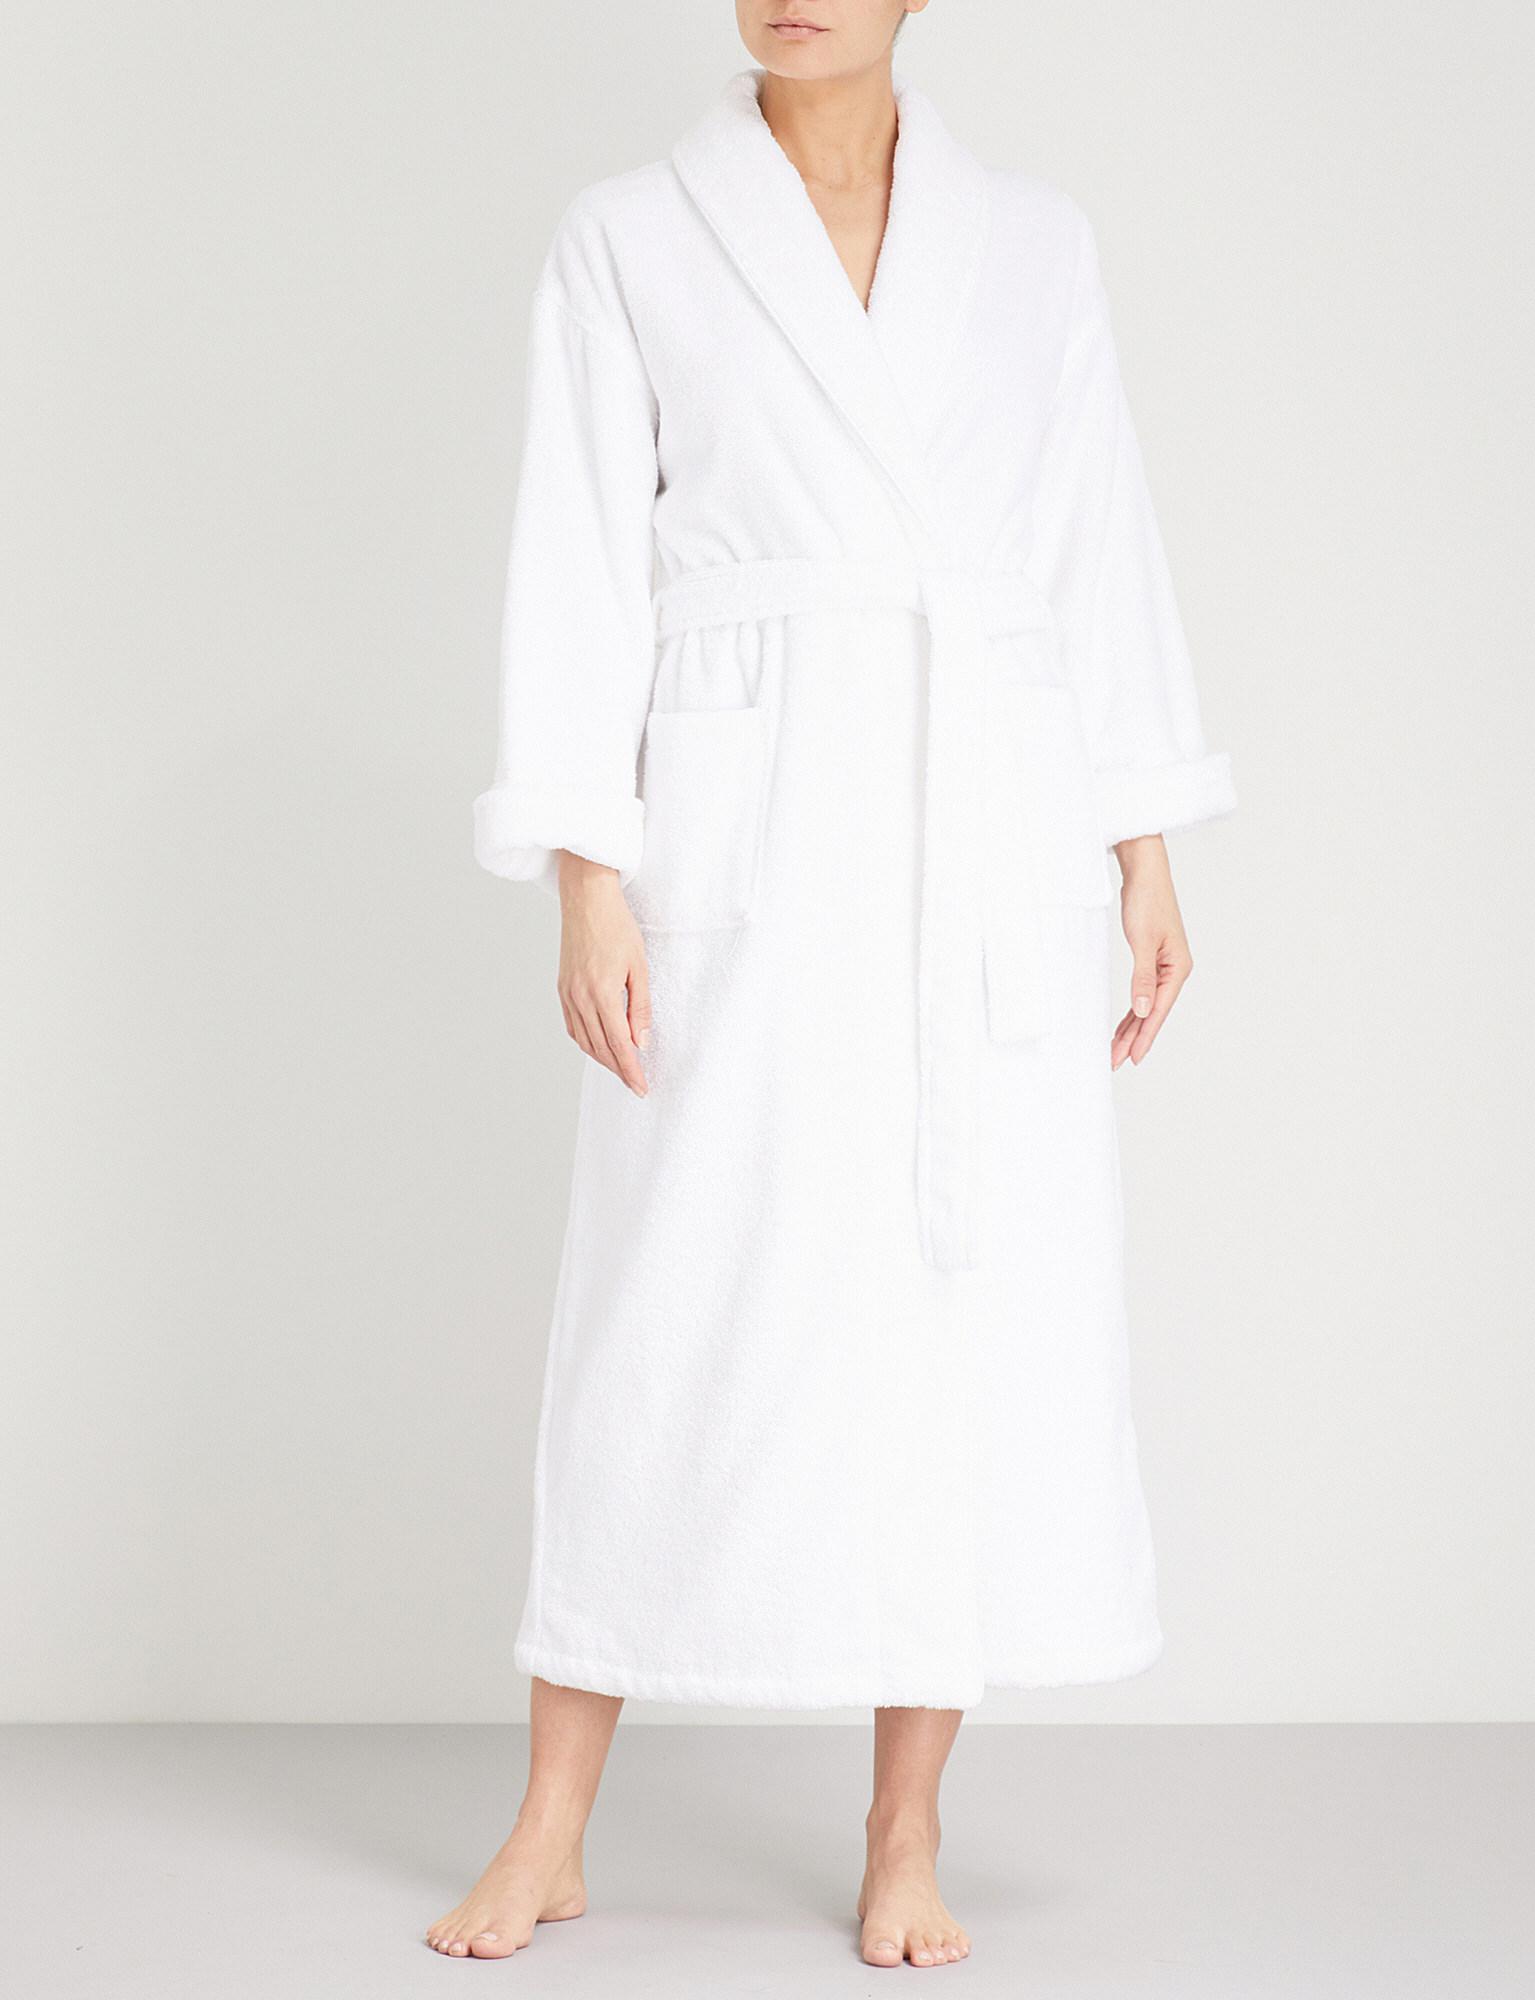 Lyst - The White Company Cotton-towelling Robe in White